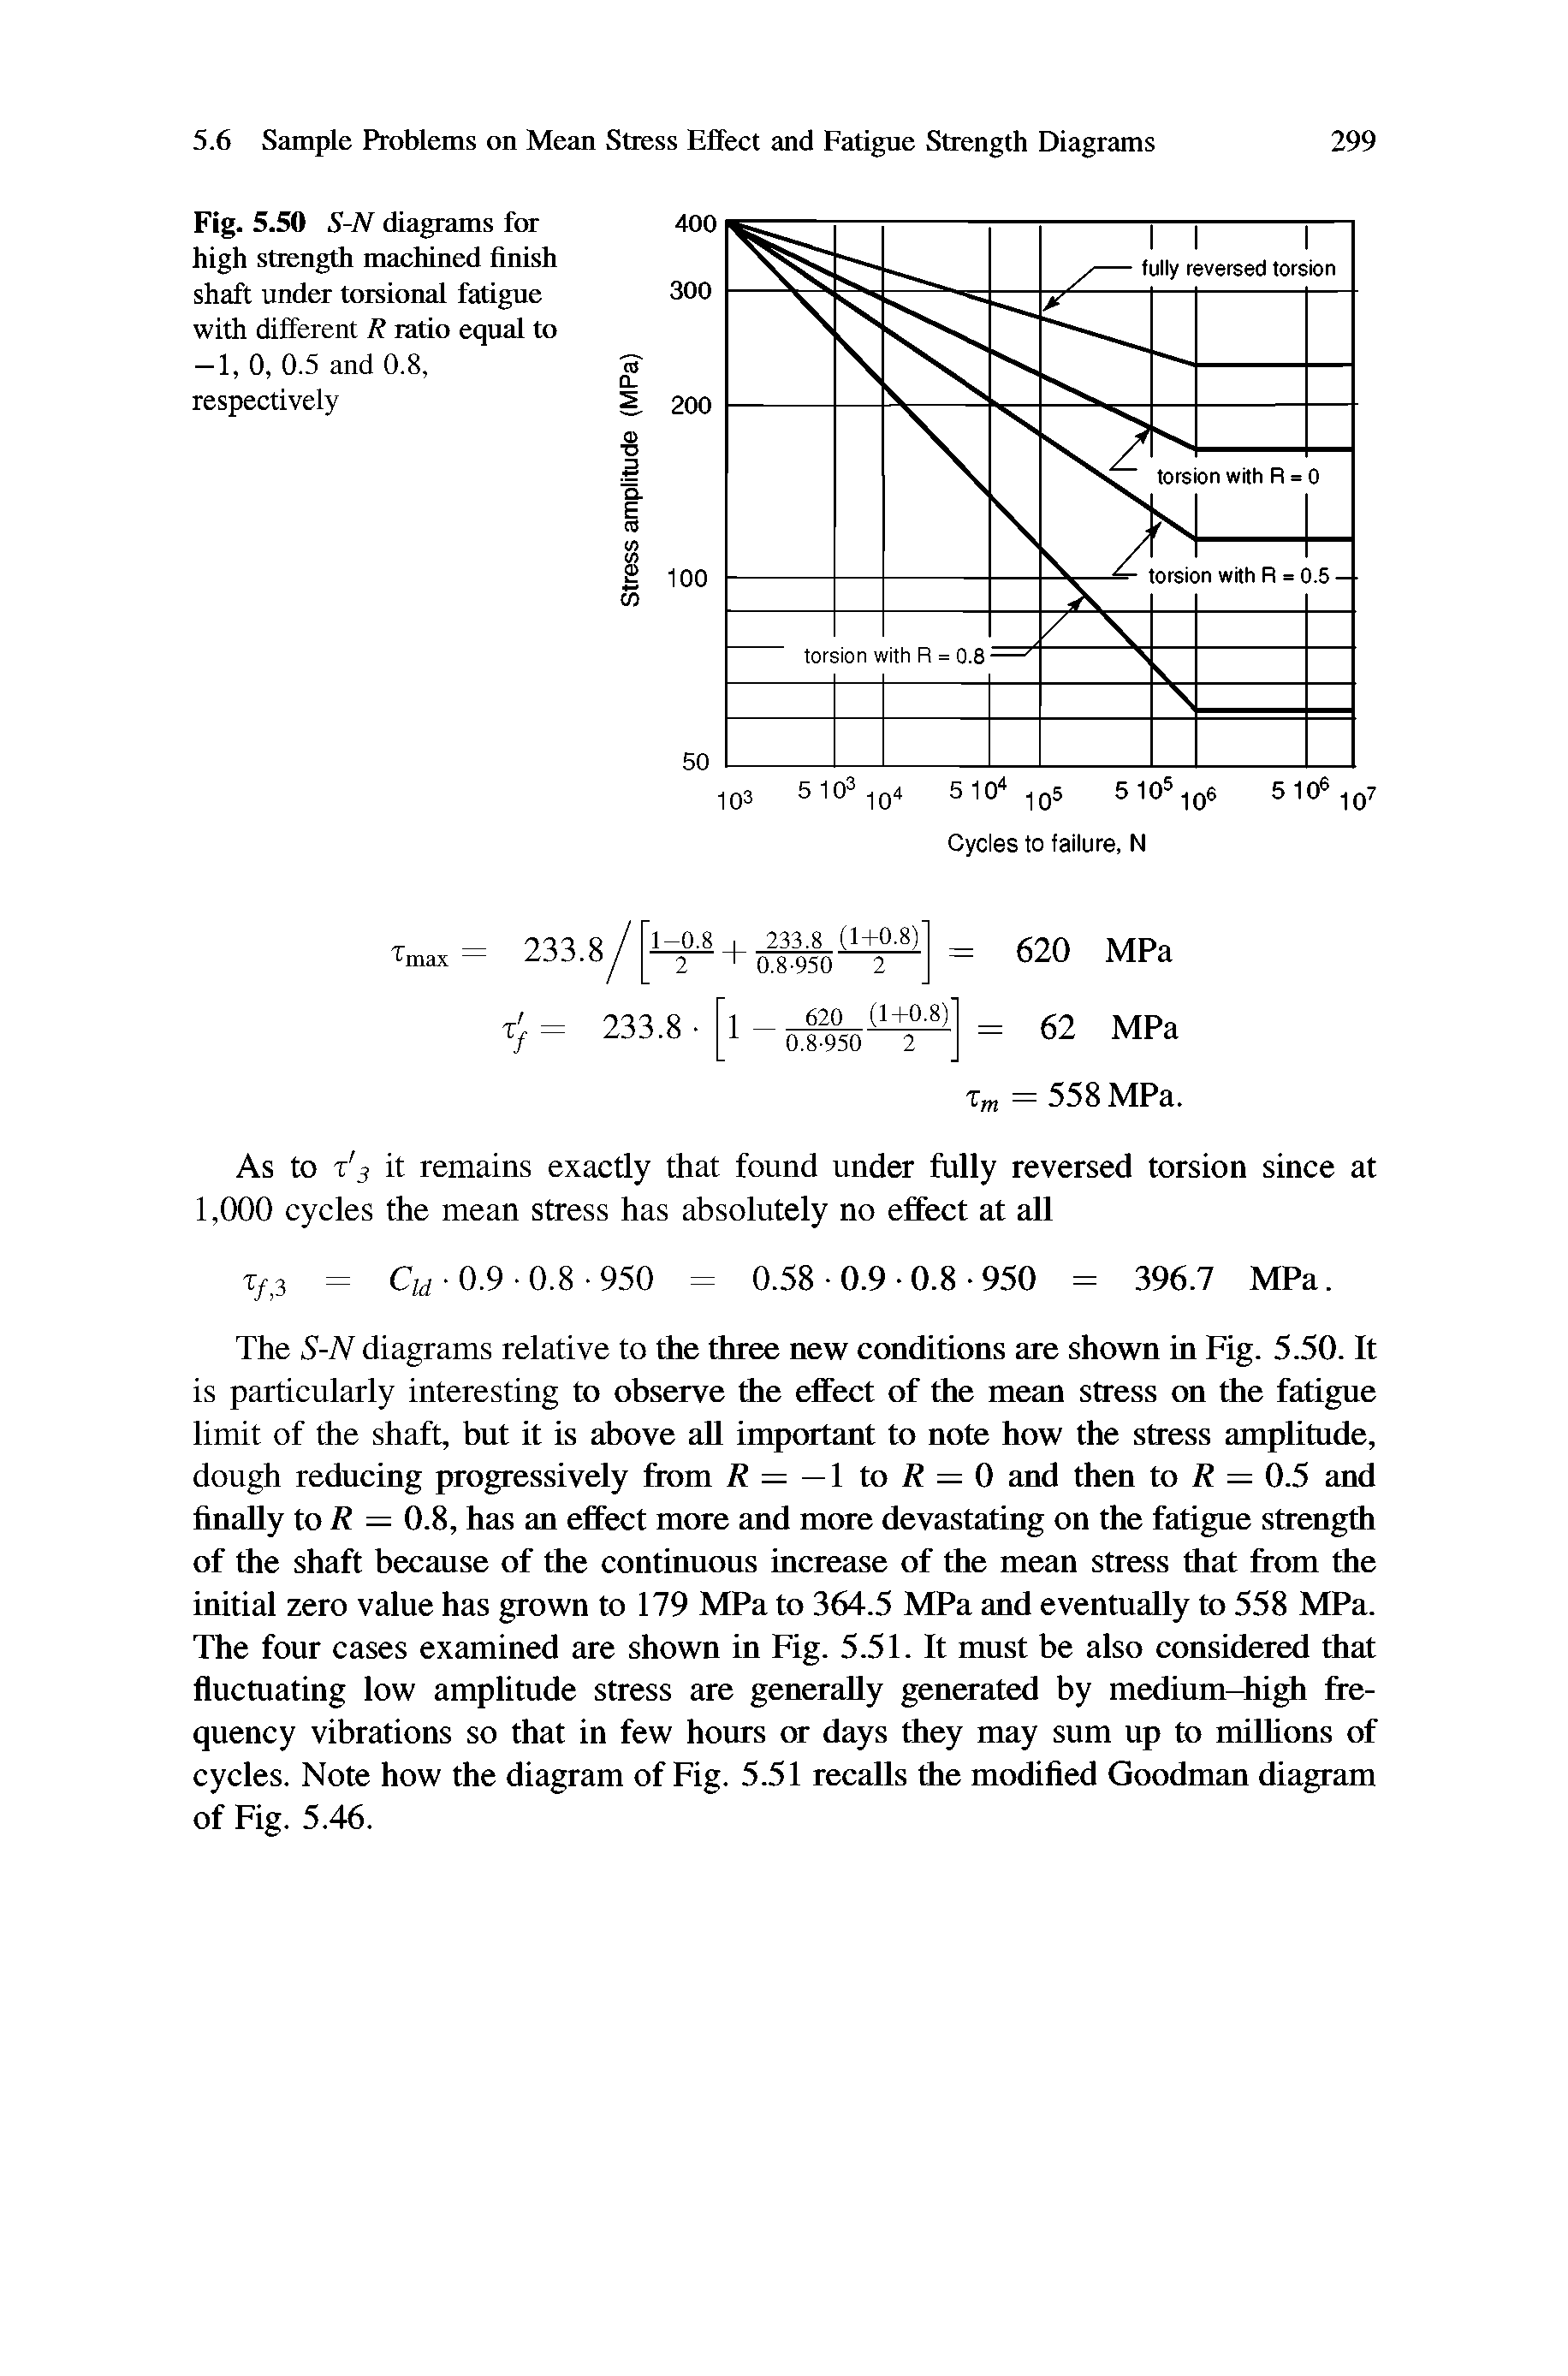 Fig. 5.50 S-N diagrams fm high strength machined finish shaft under torsional fatigue with different R ratio equal to -1, 0, 0.5 and 0.8, respectively...